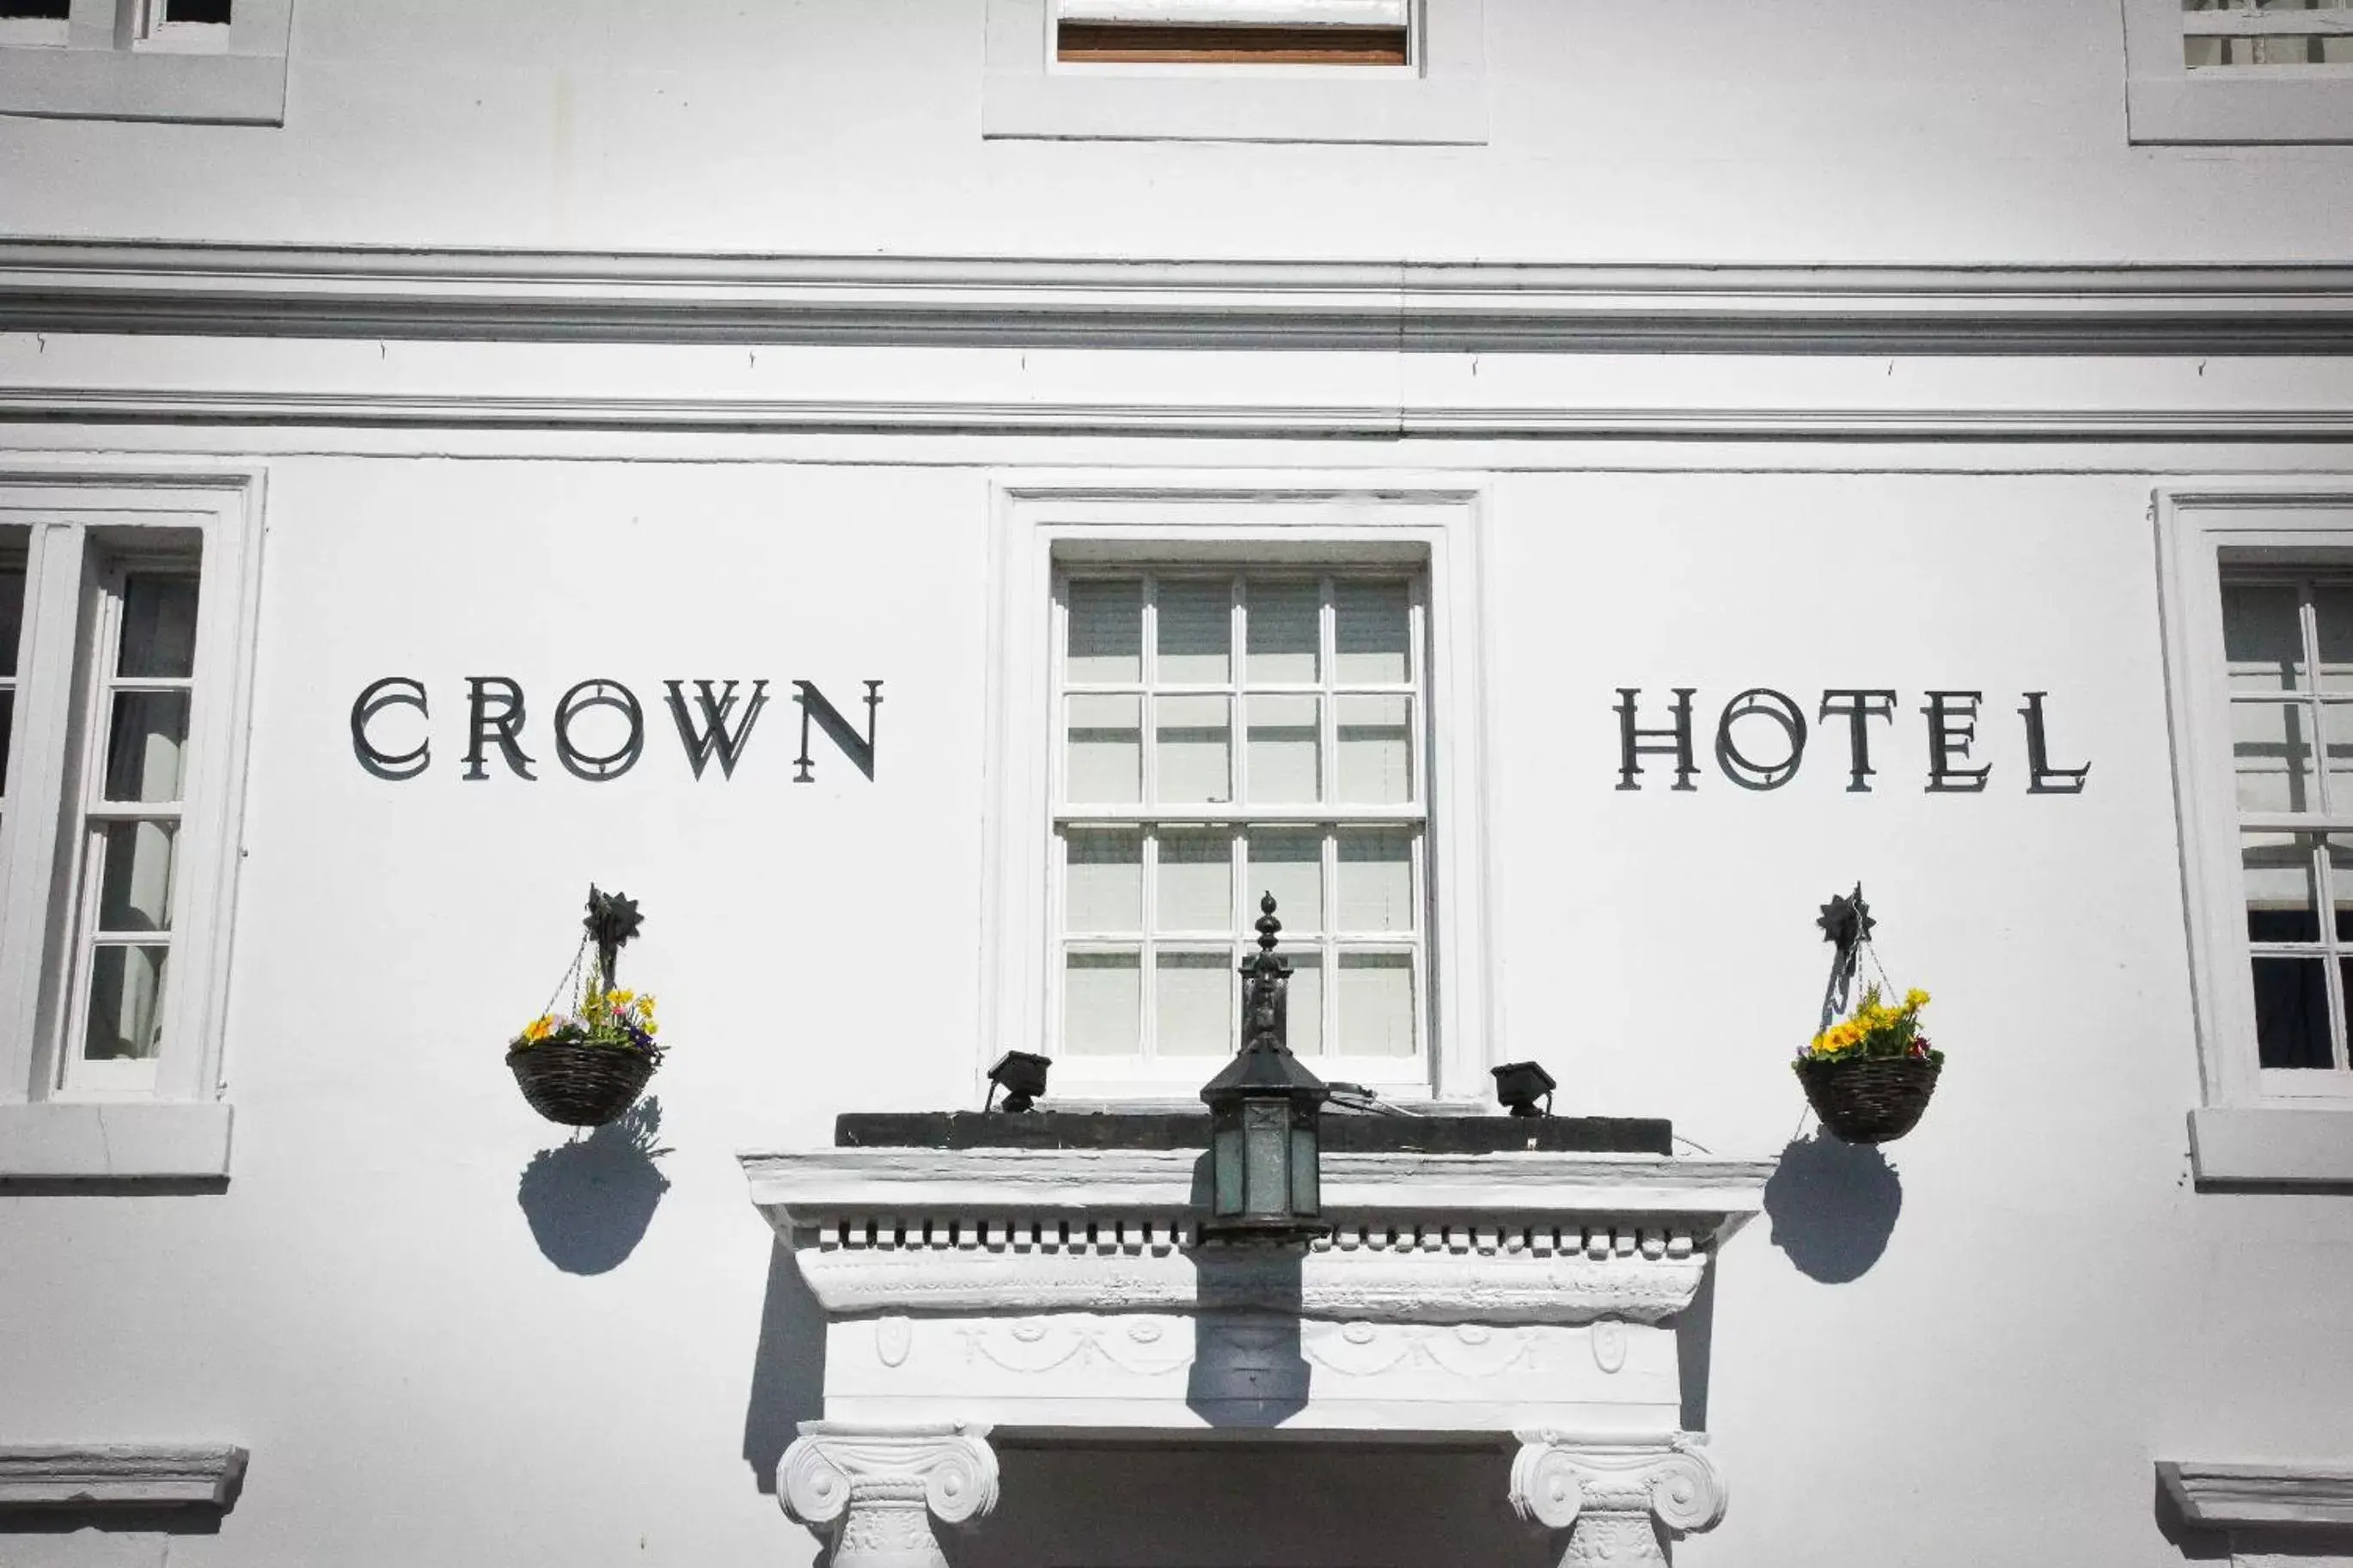 Facade/entrance in Crown Hotel Wetheral